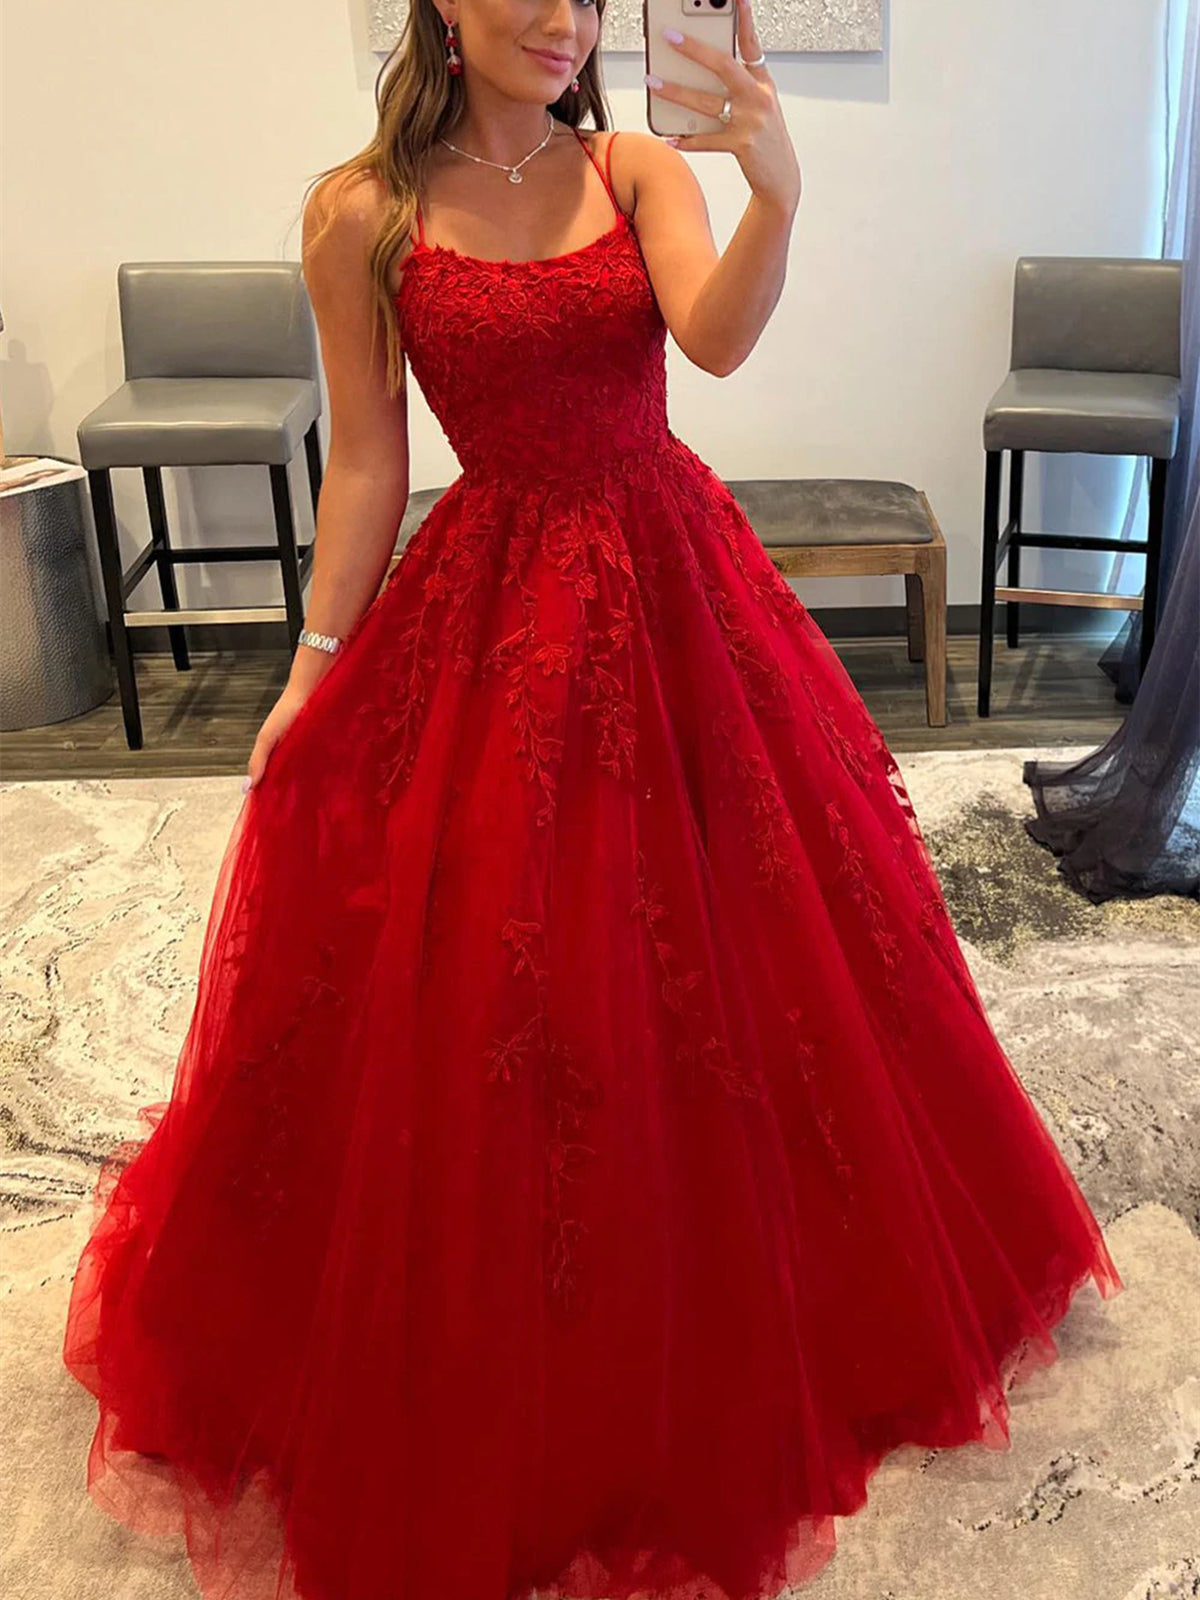 Elegant red prom dress, red wedding reception dress, red lace prom gown -  Afrikrea